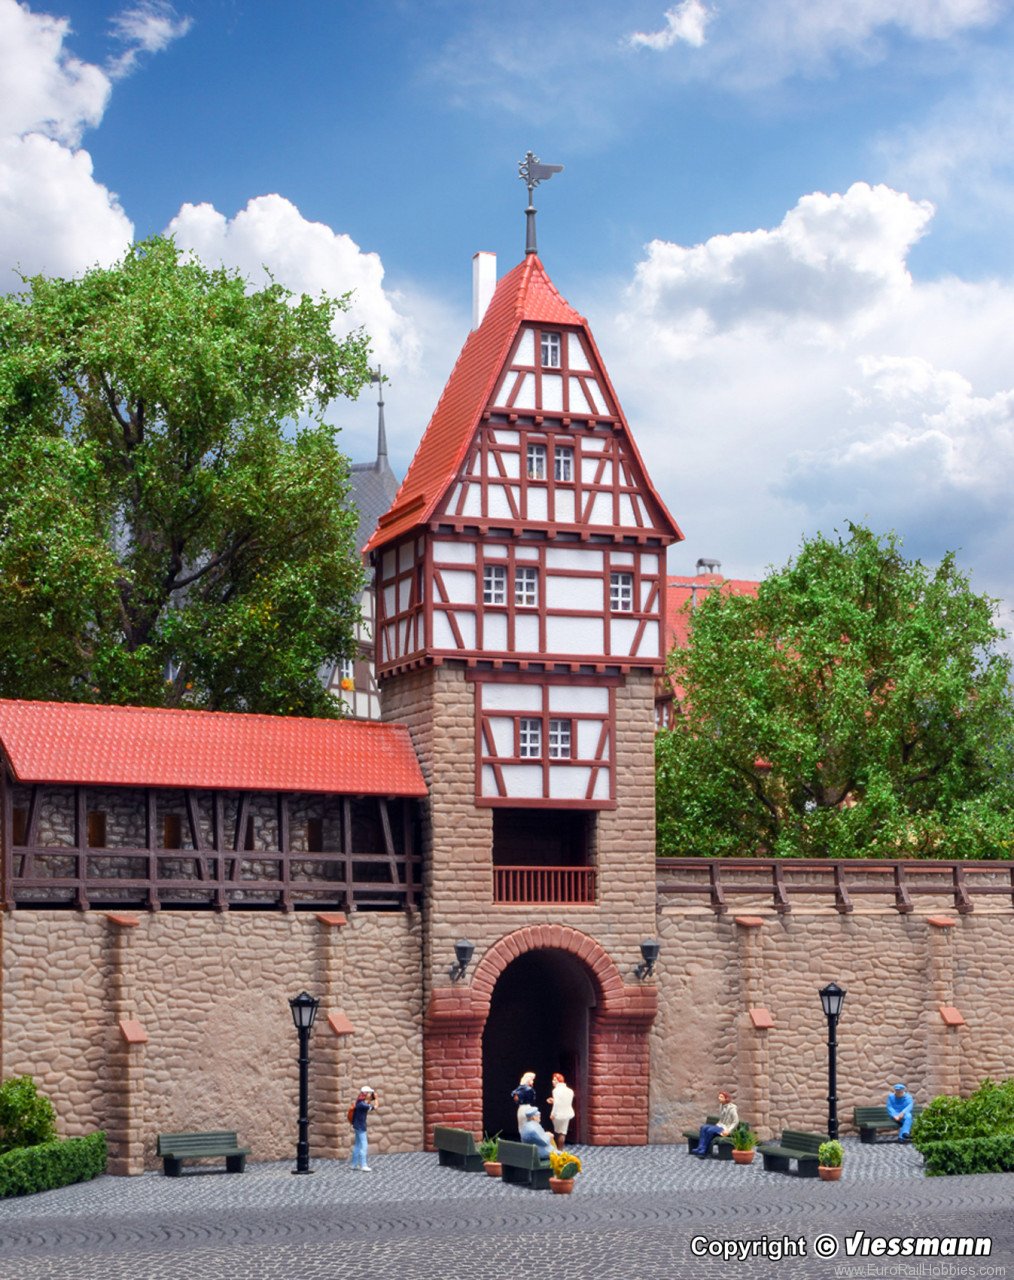 Kibri 38914 H0 City wall with timber framed tower in Weil